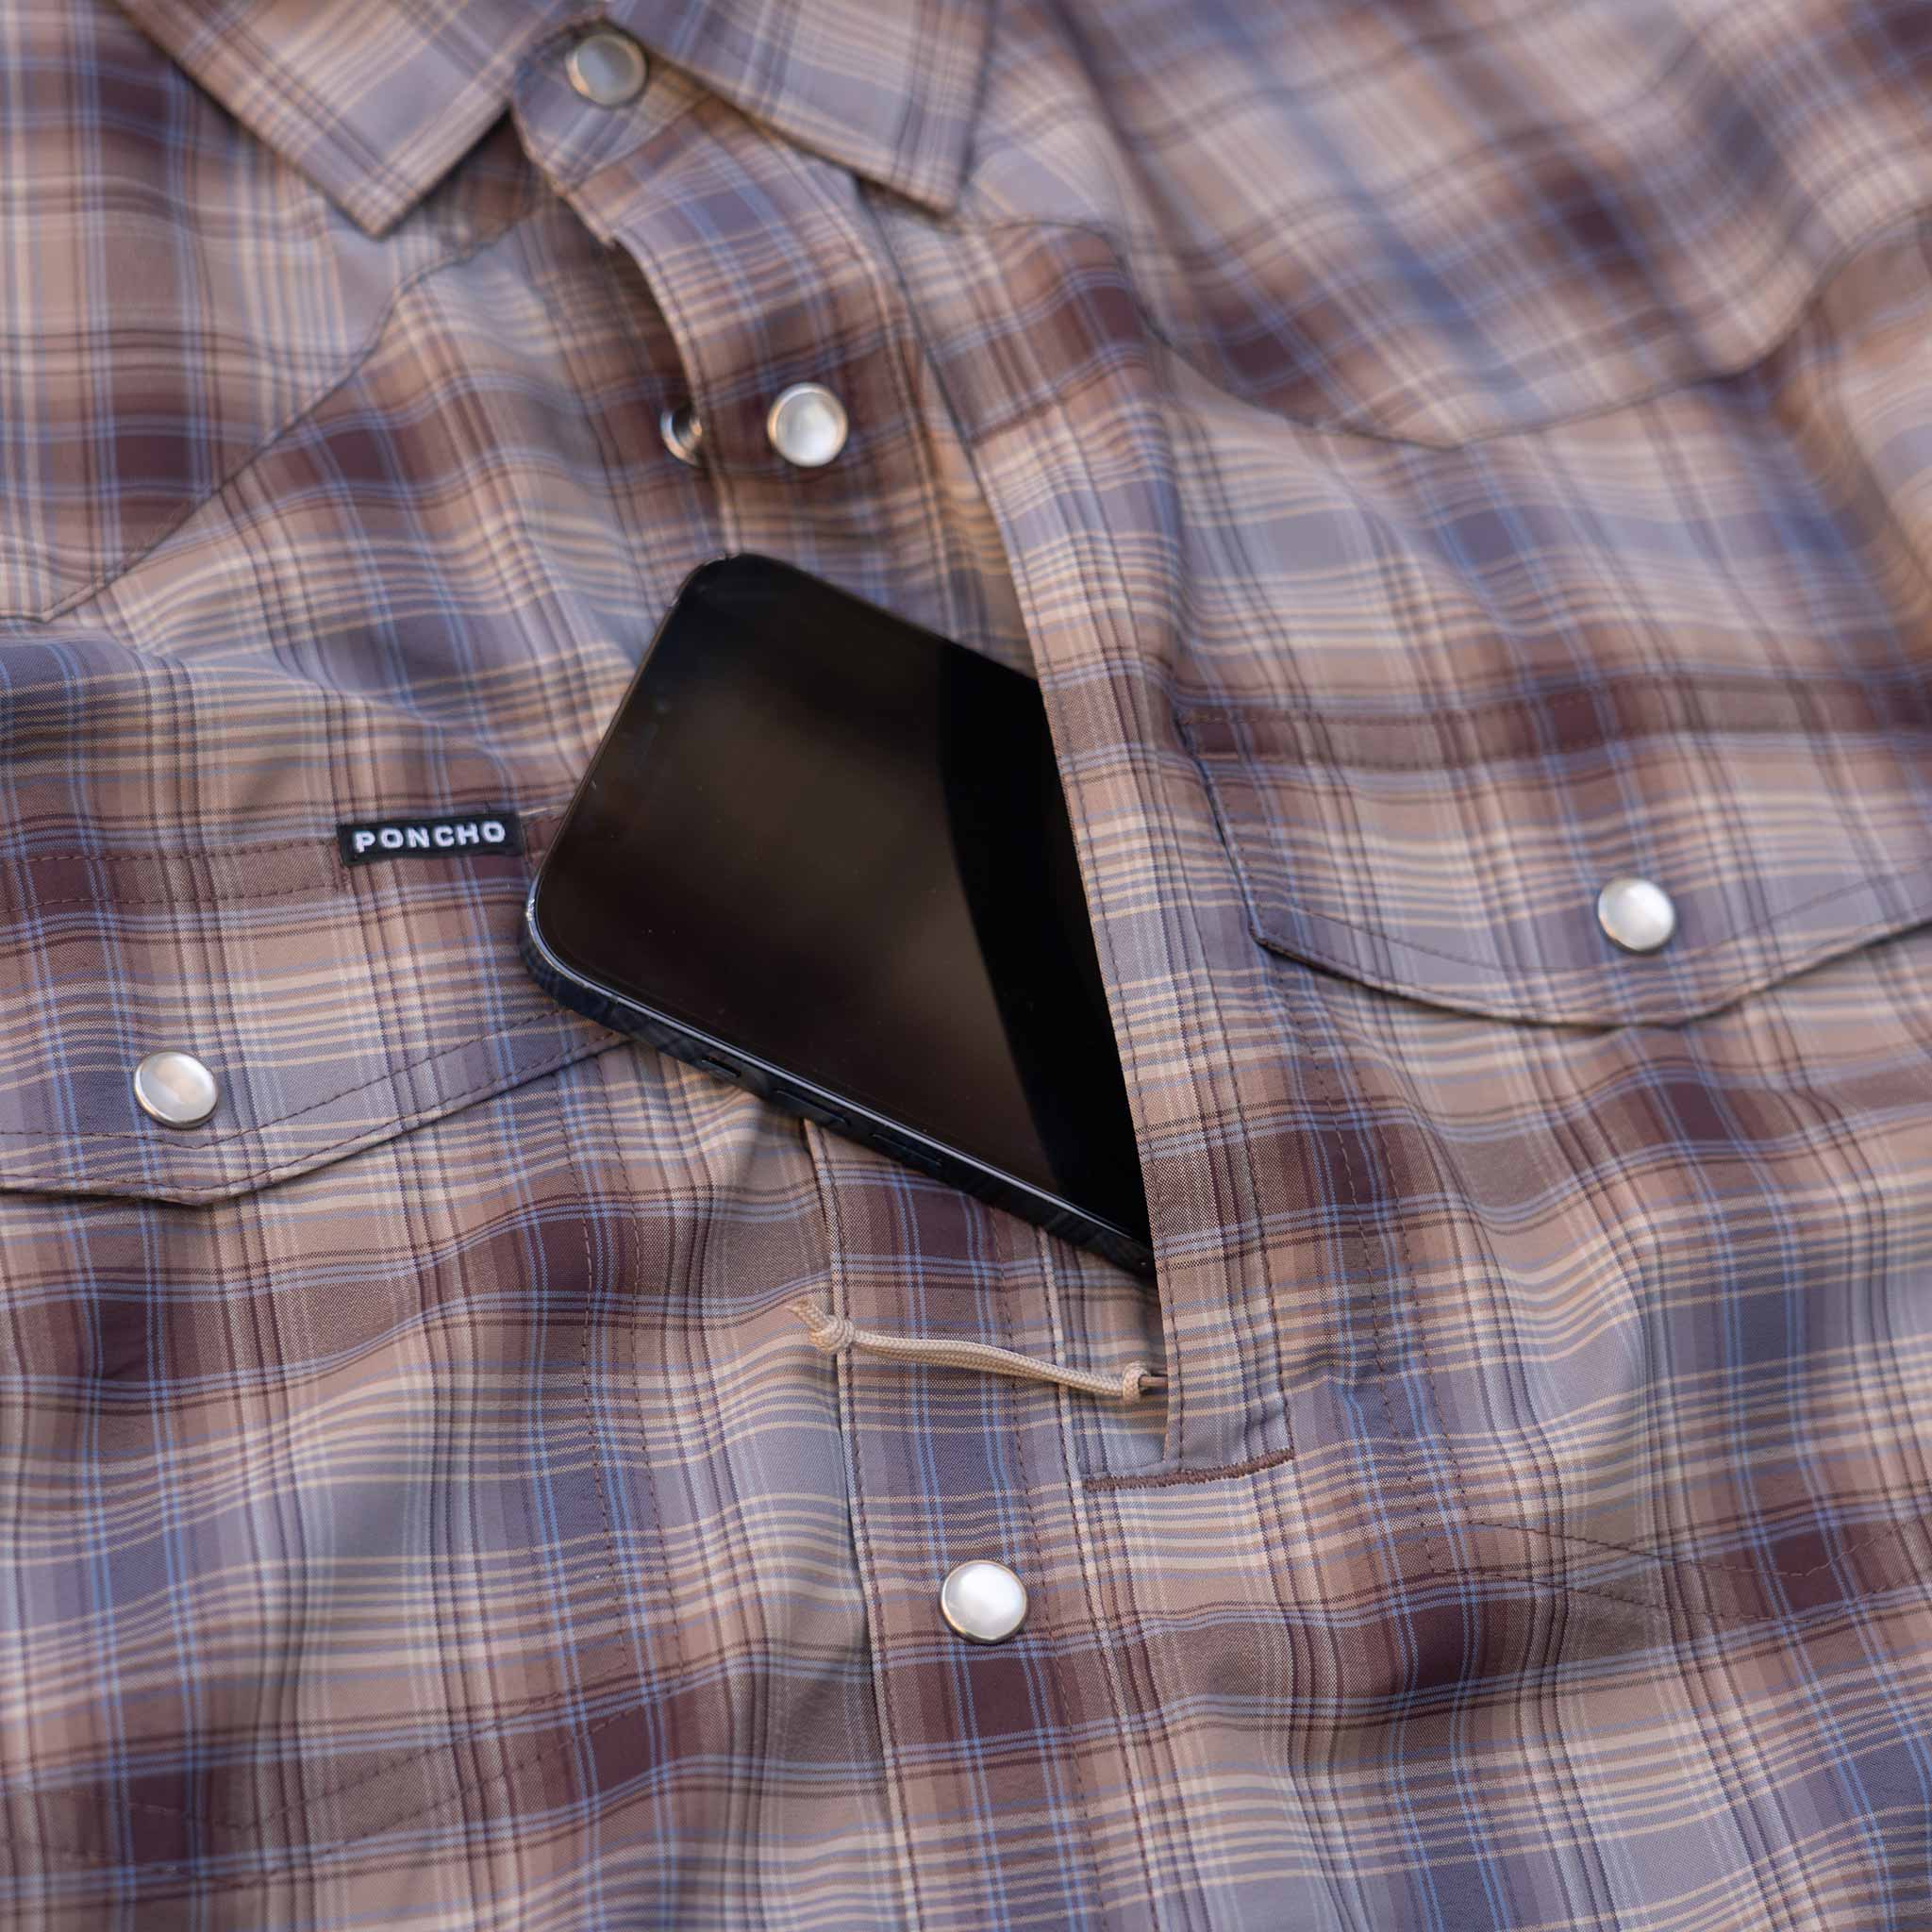 closeup of phone in chest zip pocket on shirt